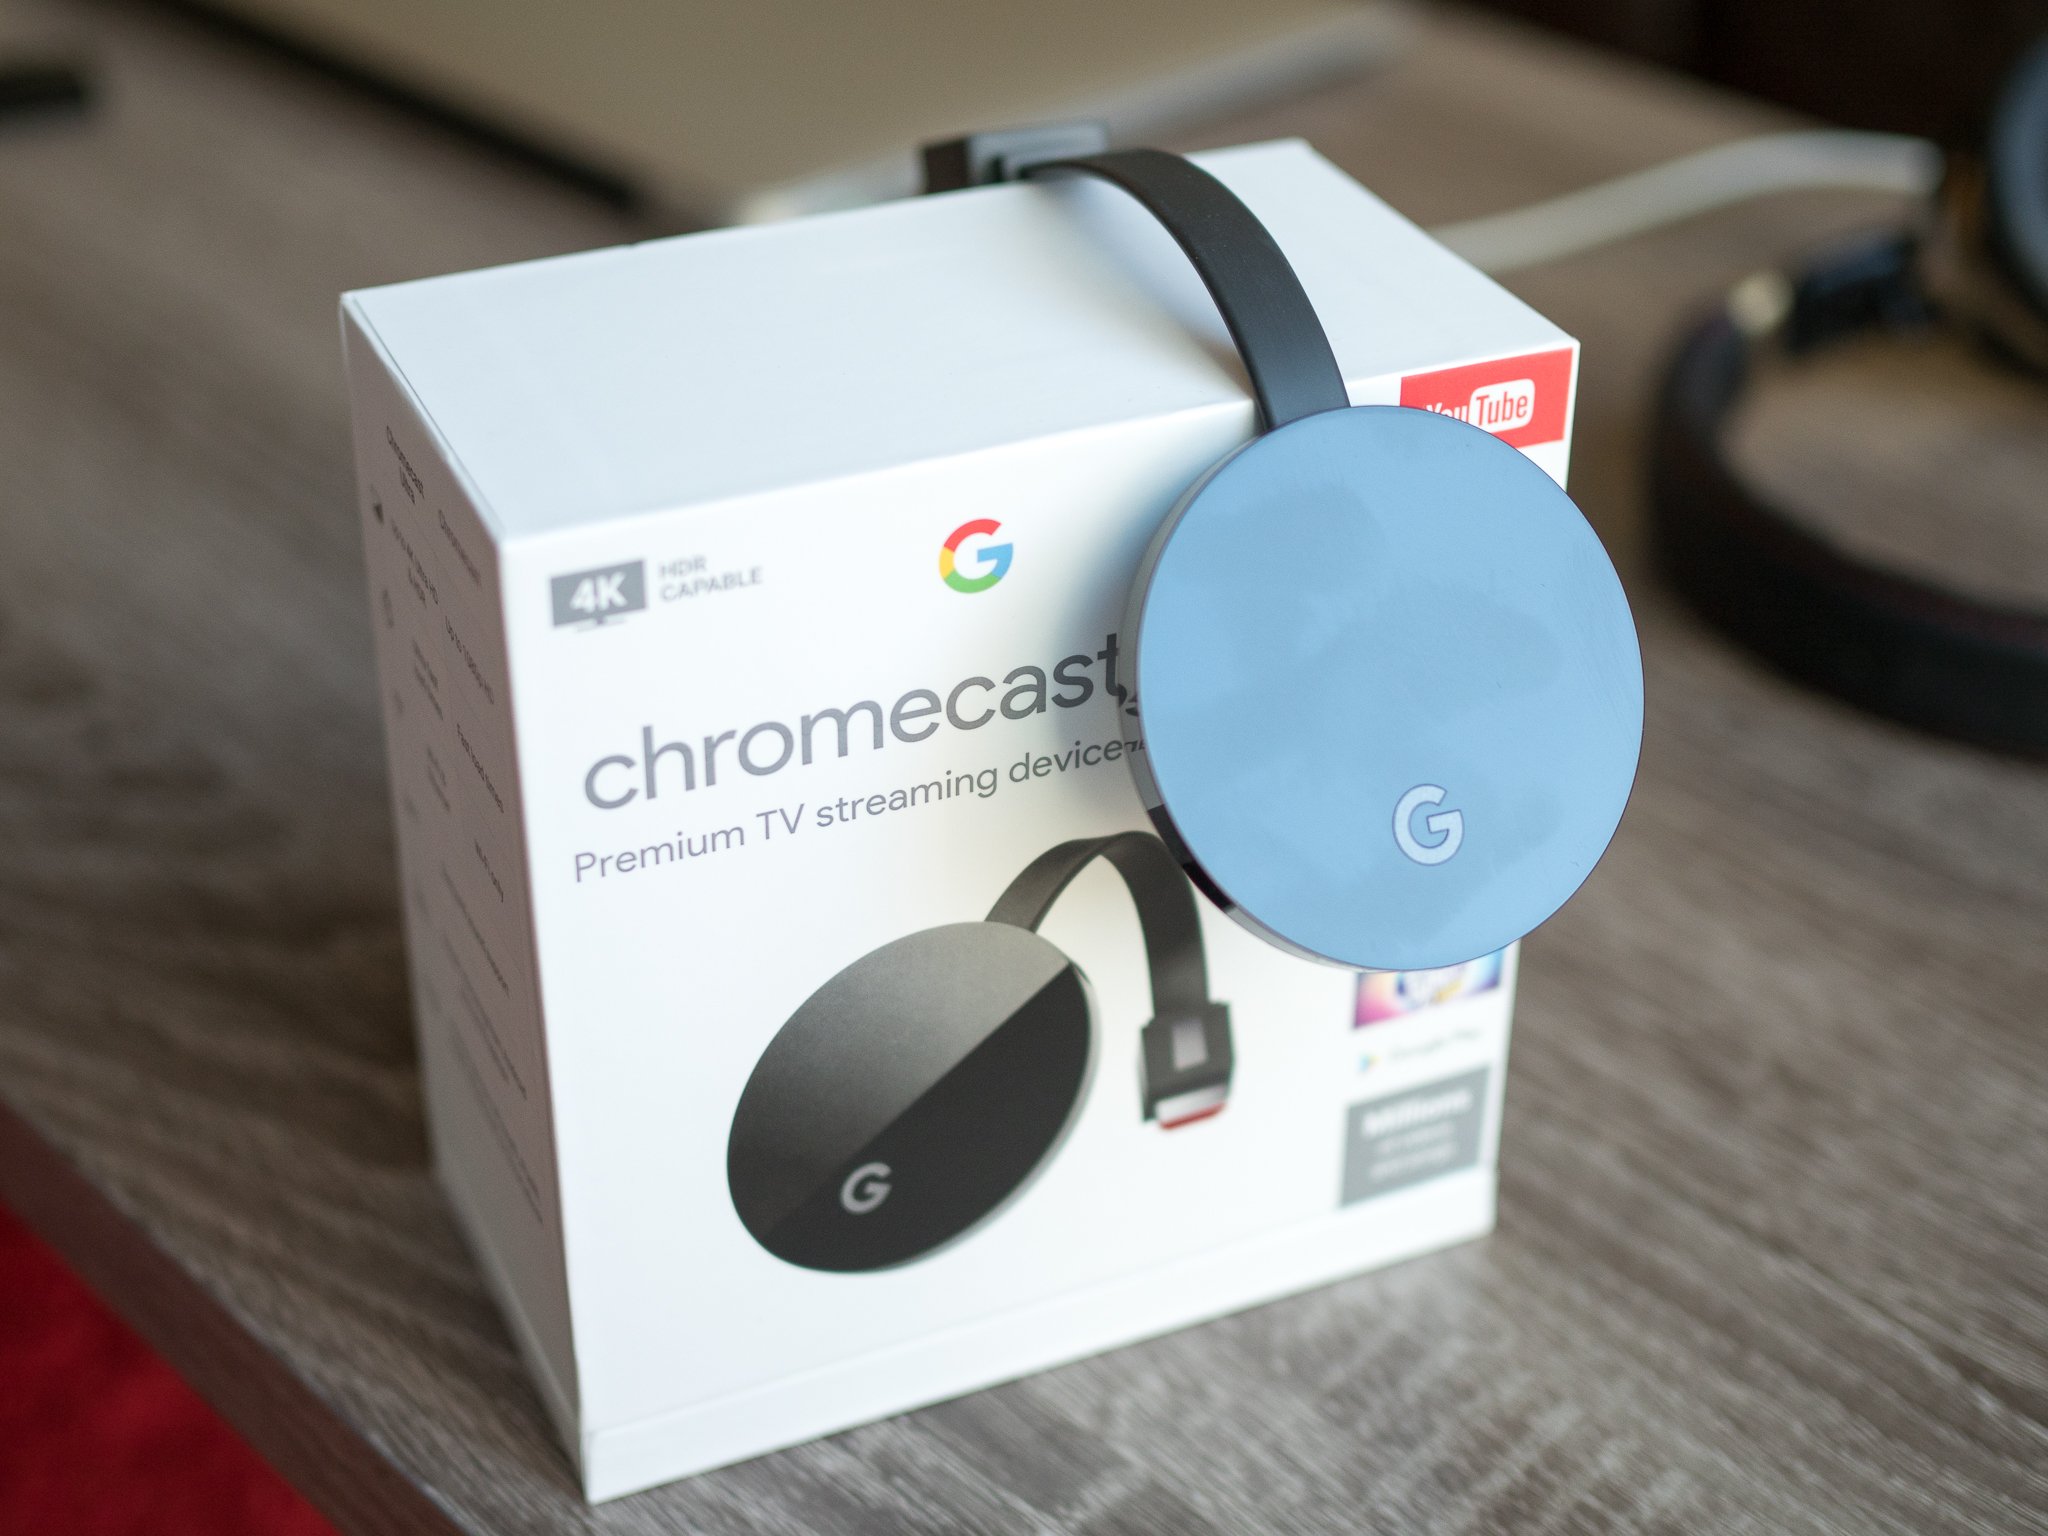 bidragyder pint Settle Has Google discontinued the Chromecast? | Android Central